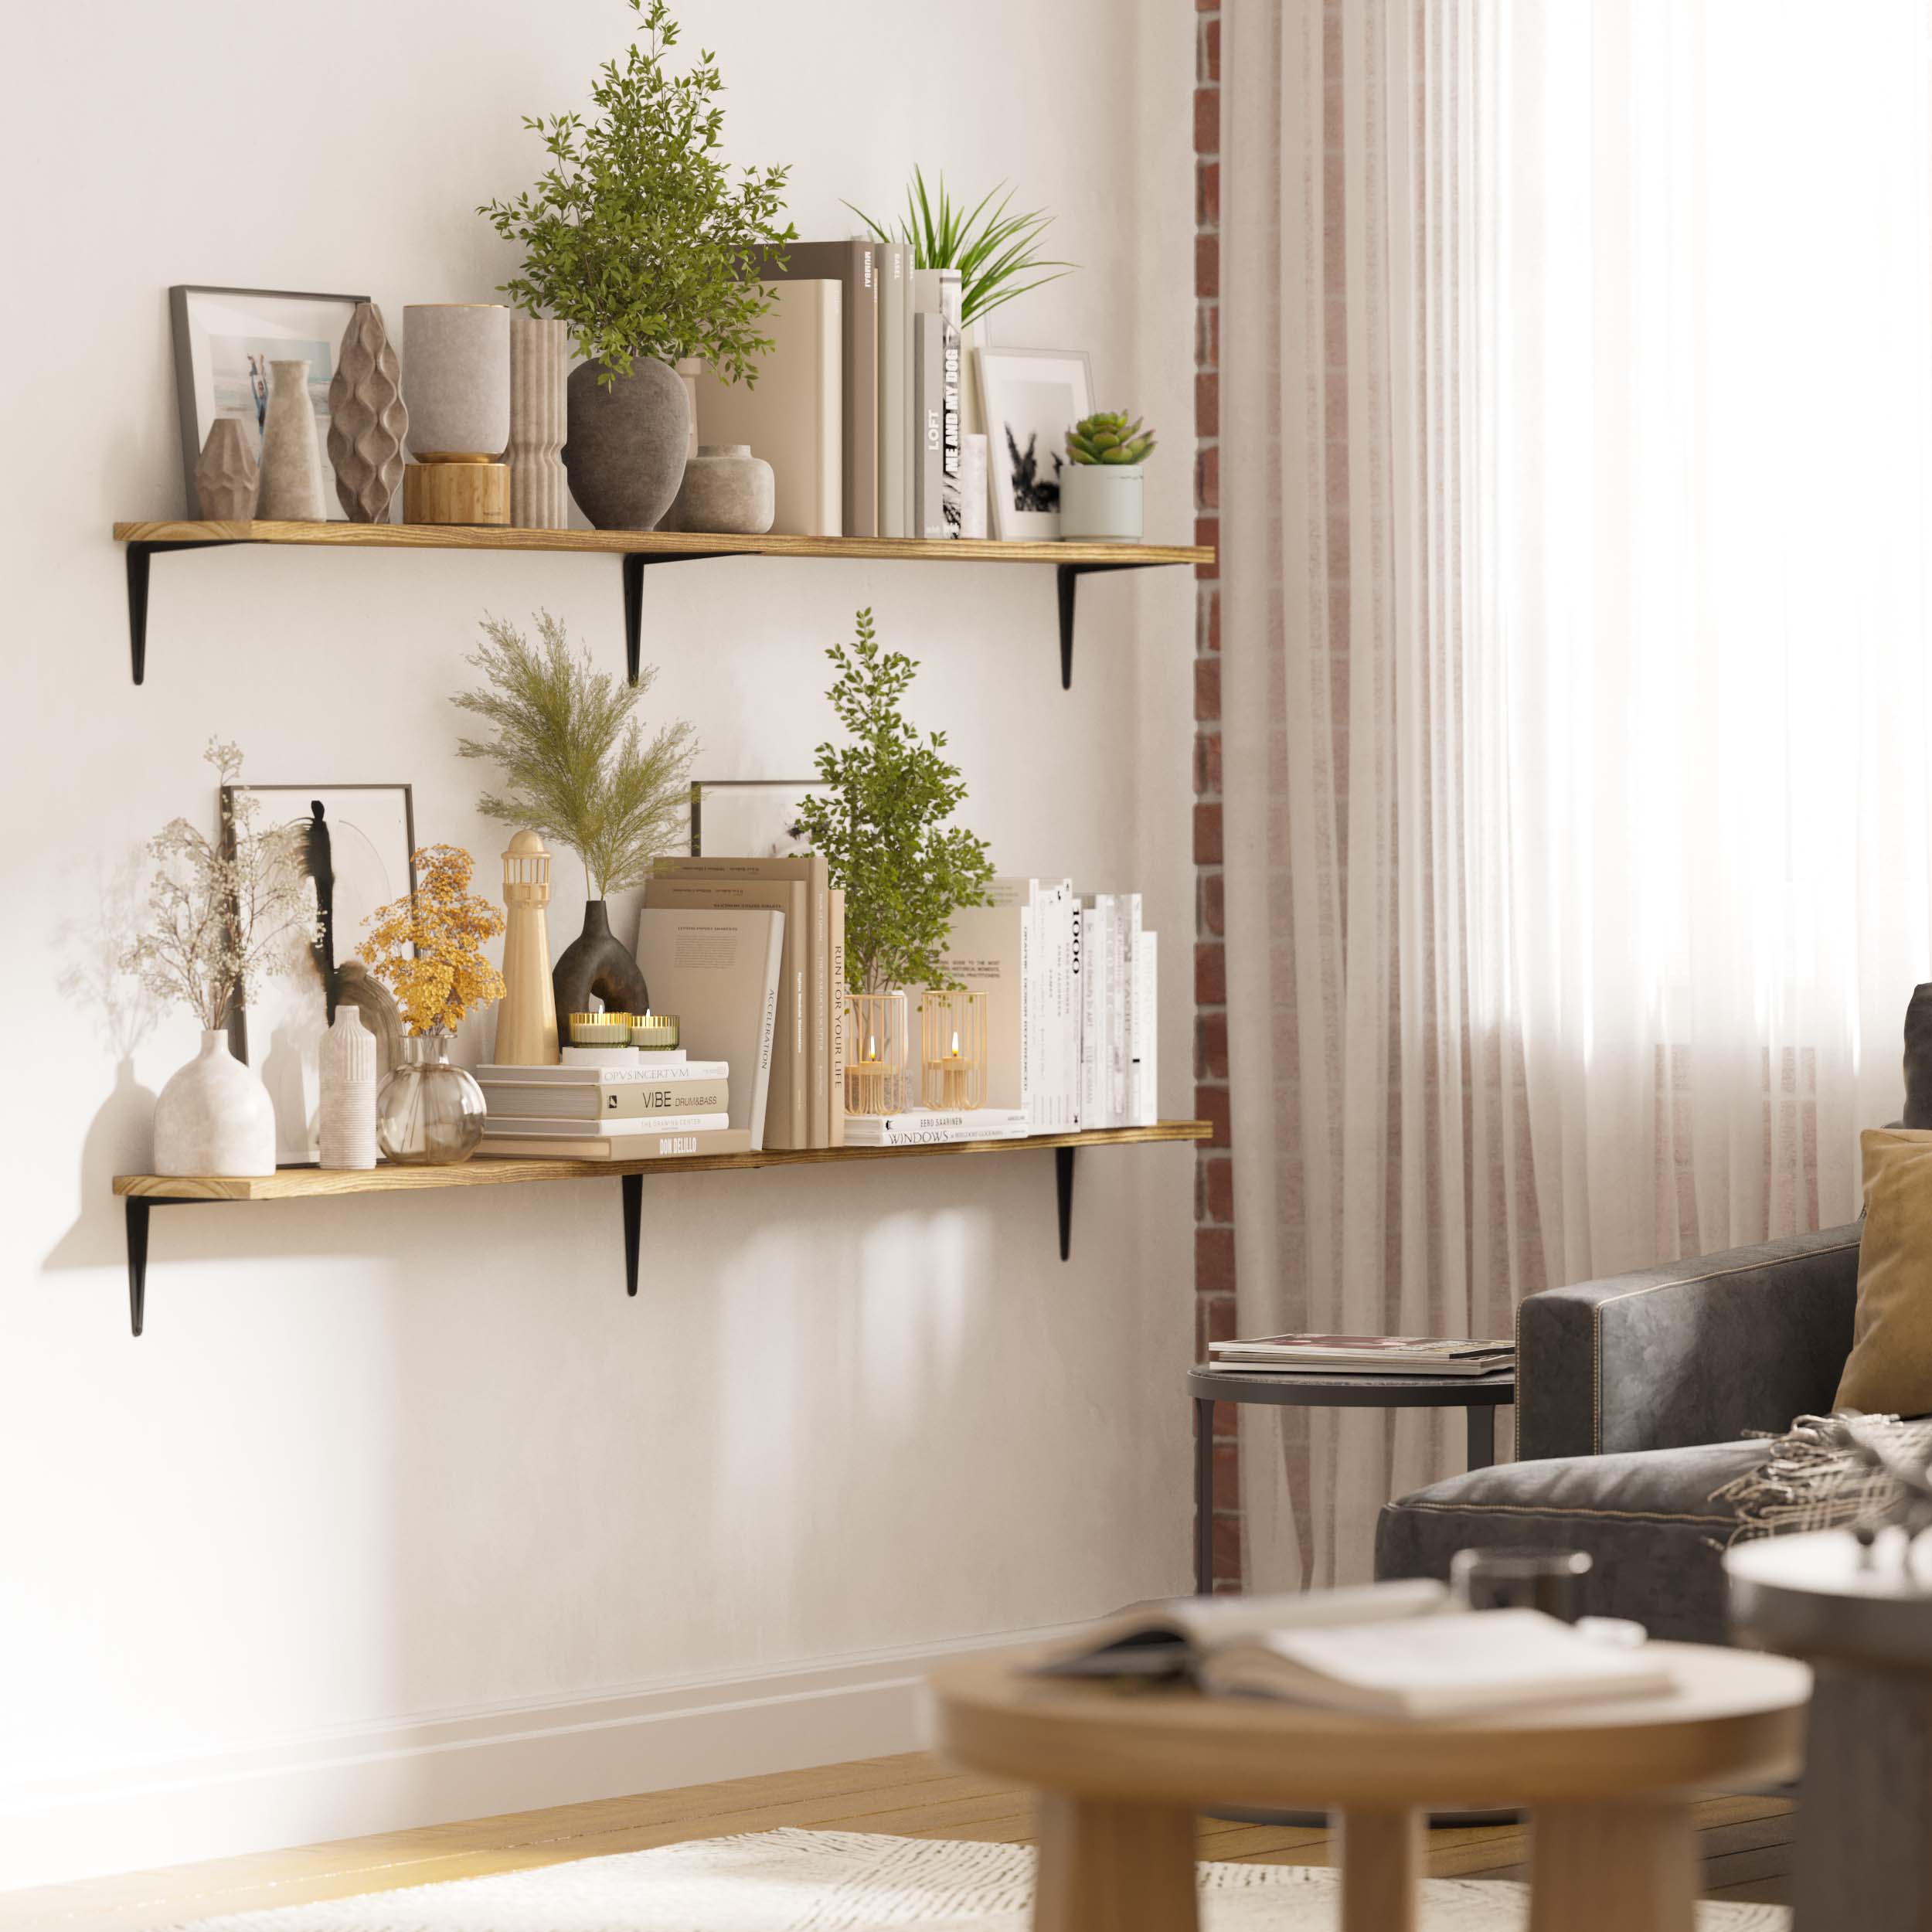 Two-tiered wall bookshelves adorned with vases, plants, and neatly arranged books, creating a warm living space.